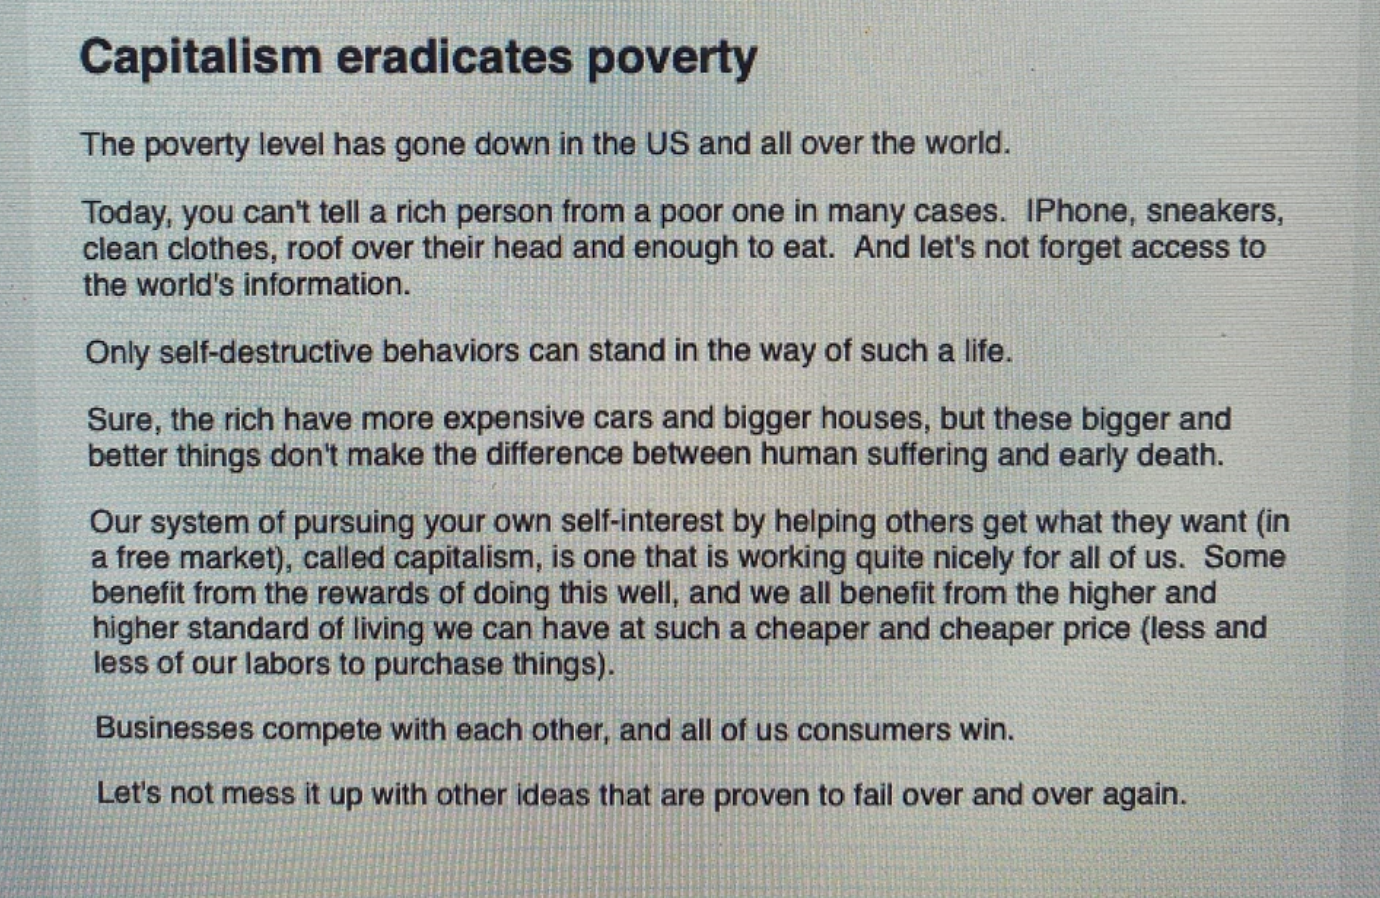 document - Capitalism eradicates poverty The poverty level has gone down in the Us and all over the world. Today, you can't tell a rich person from a poor one in many cases. IPhone, sneakers, clean clothes, roof over their head and enough to eat. And let'